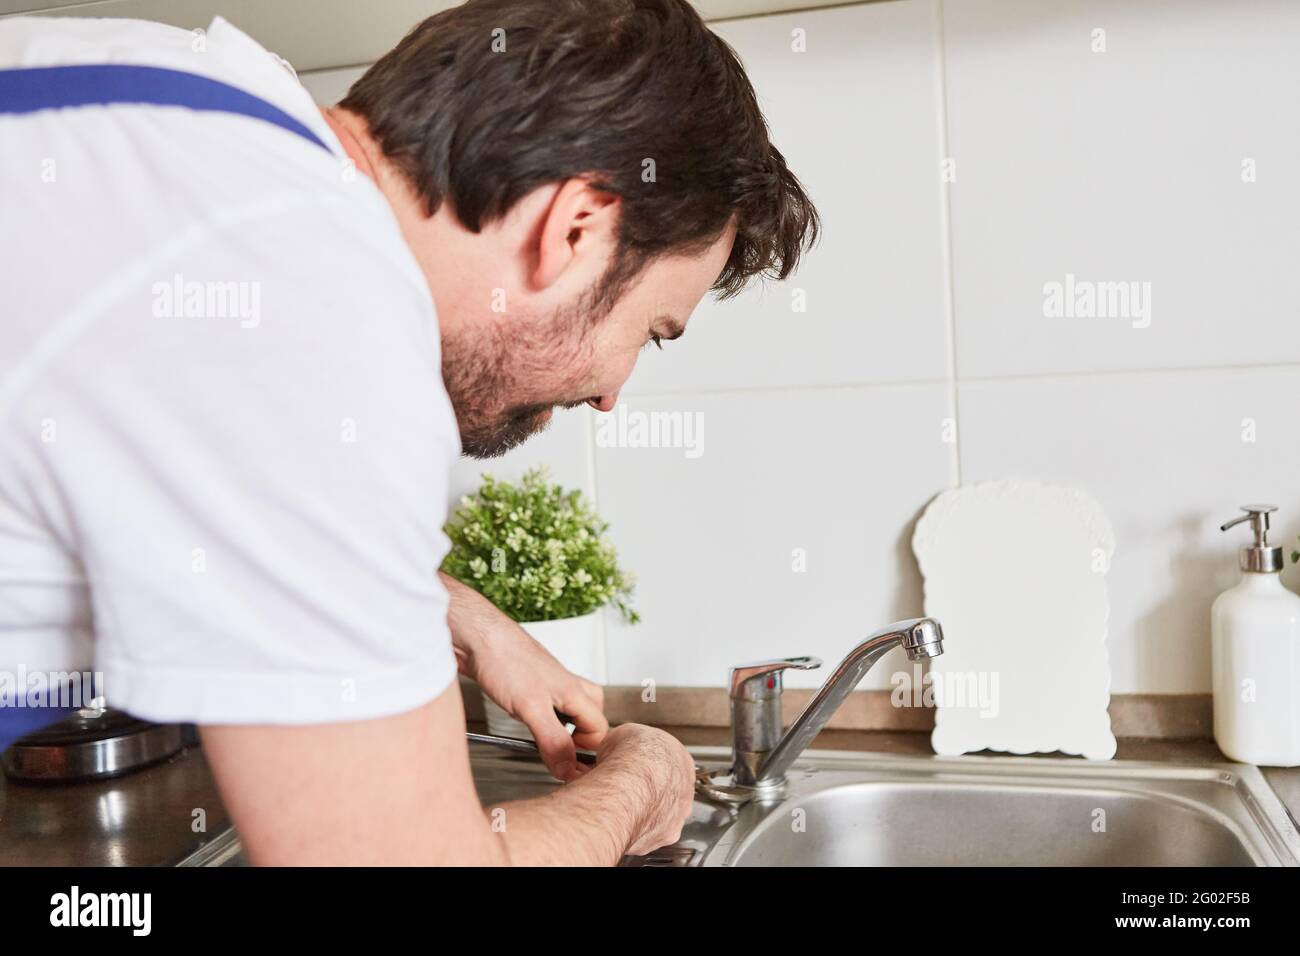 Professional plumber or do-it-yourselfer connecting the kitchen faucet to the sink Stock Photo